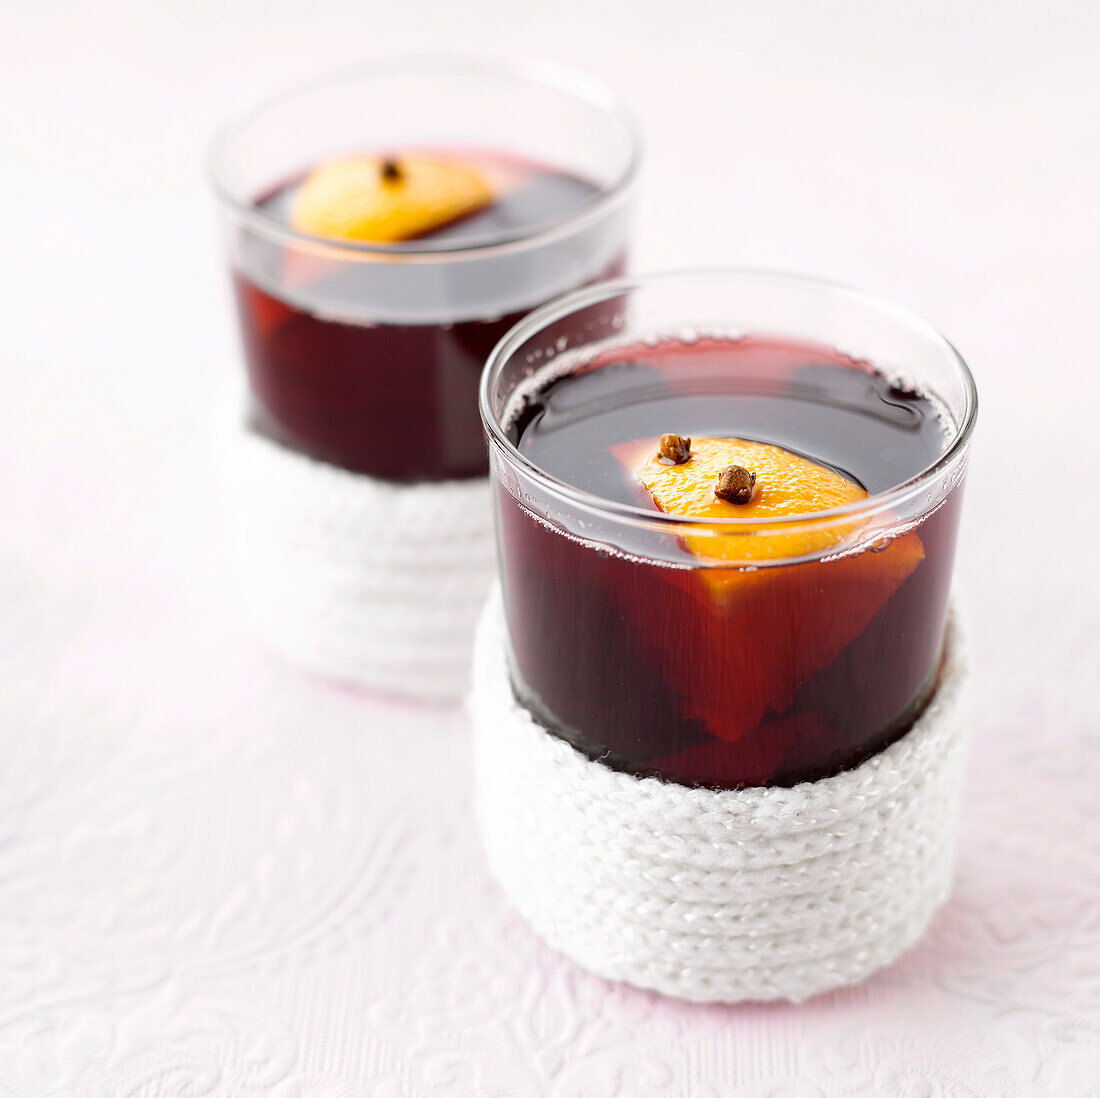 Hot spicy wine with orange and cloves